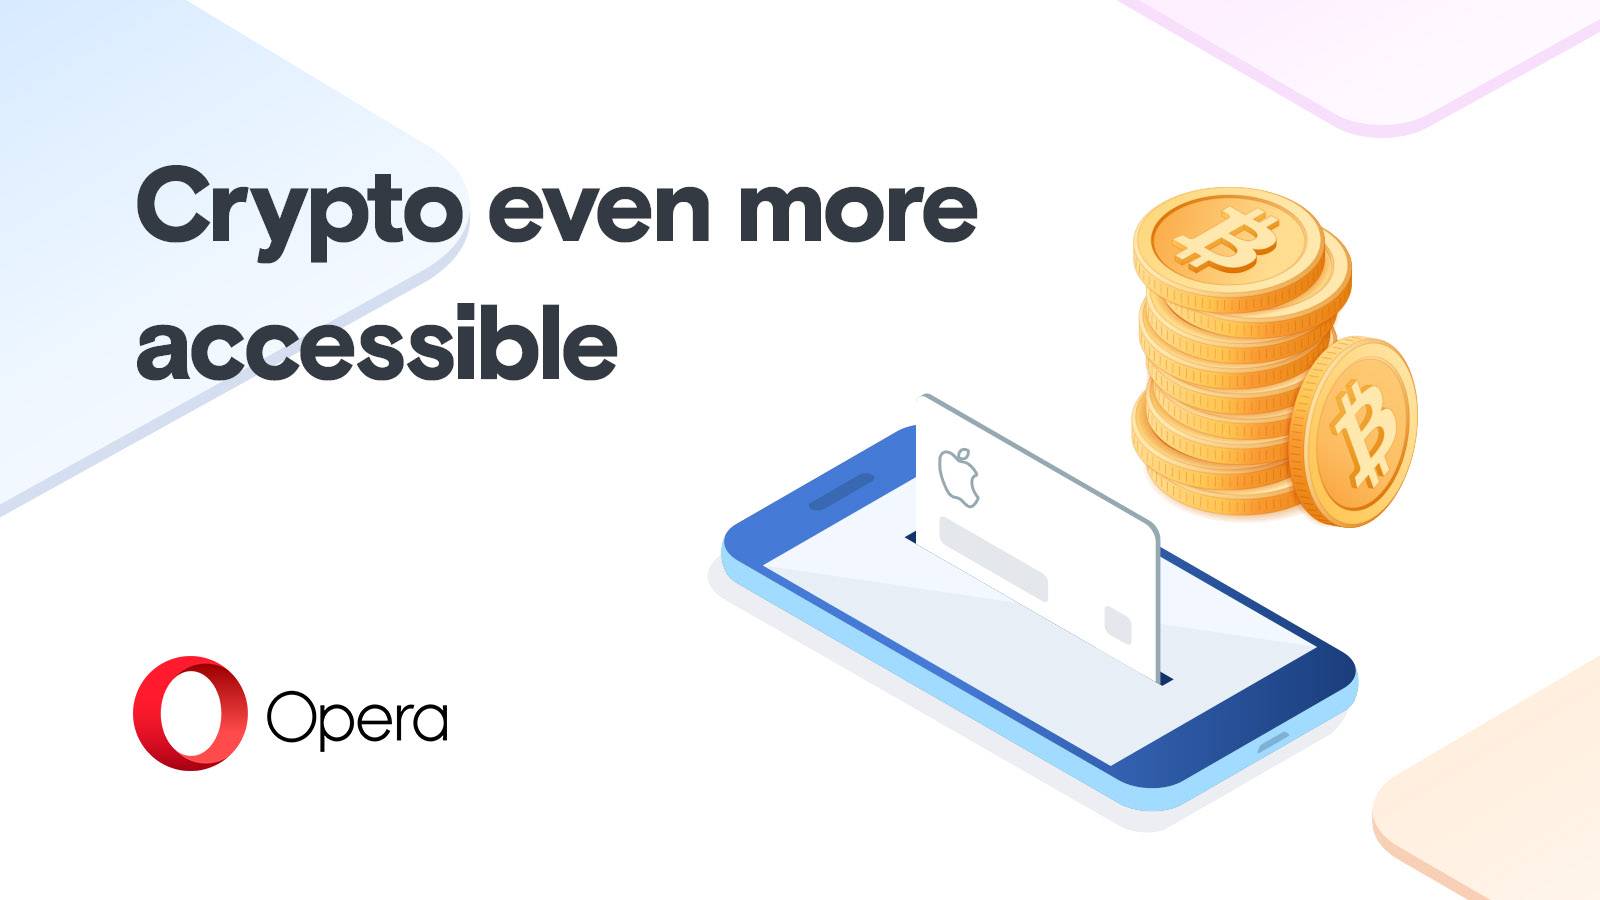 In the crypto browser from Opera, crypto is easily accessible.